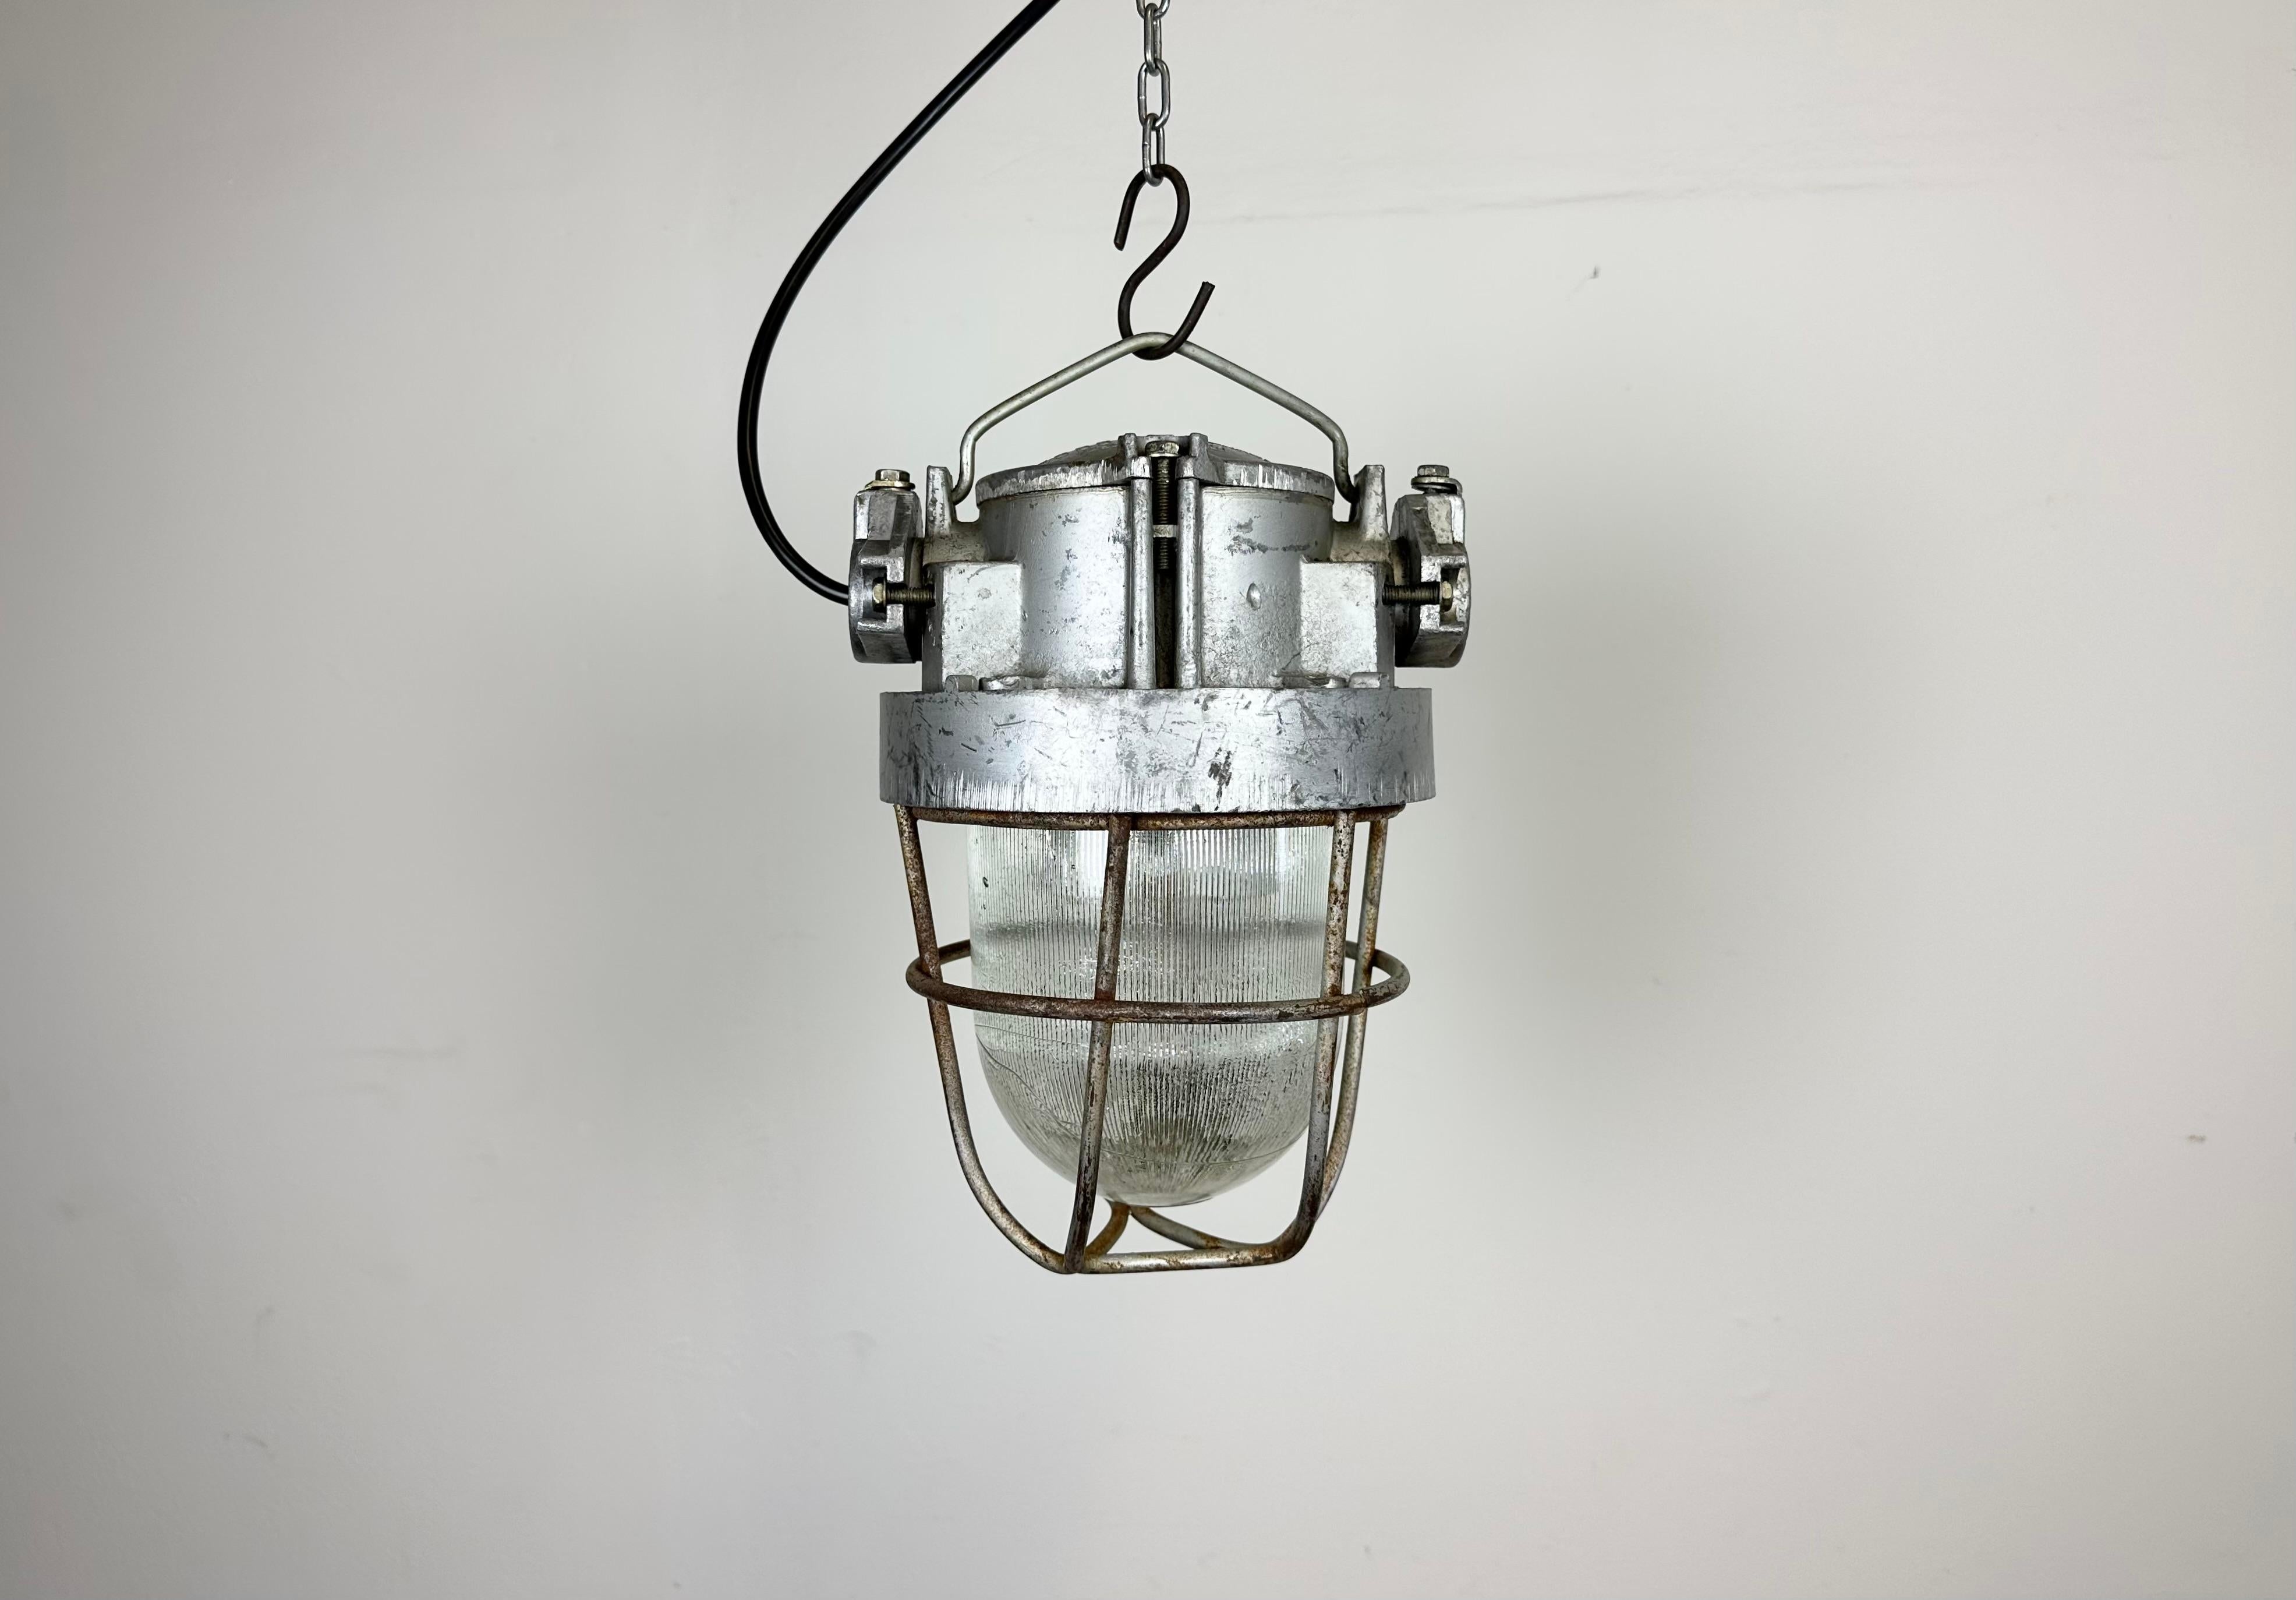 - Vintage Industrial lamp from the 1960s 
- Made in former Soviet Union
- Silver cast aluminium iron top 
- Iron grid
- Stripped glass cover
- The socket requires E 27/ E26 lightbulbs 
- New wire 
- Diameter: 19 cm
- Weight : 4.8 kg.